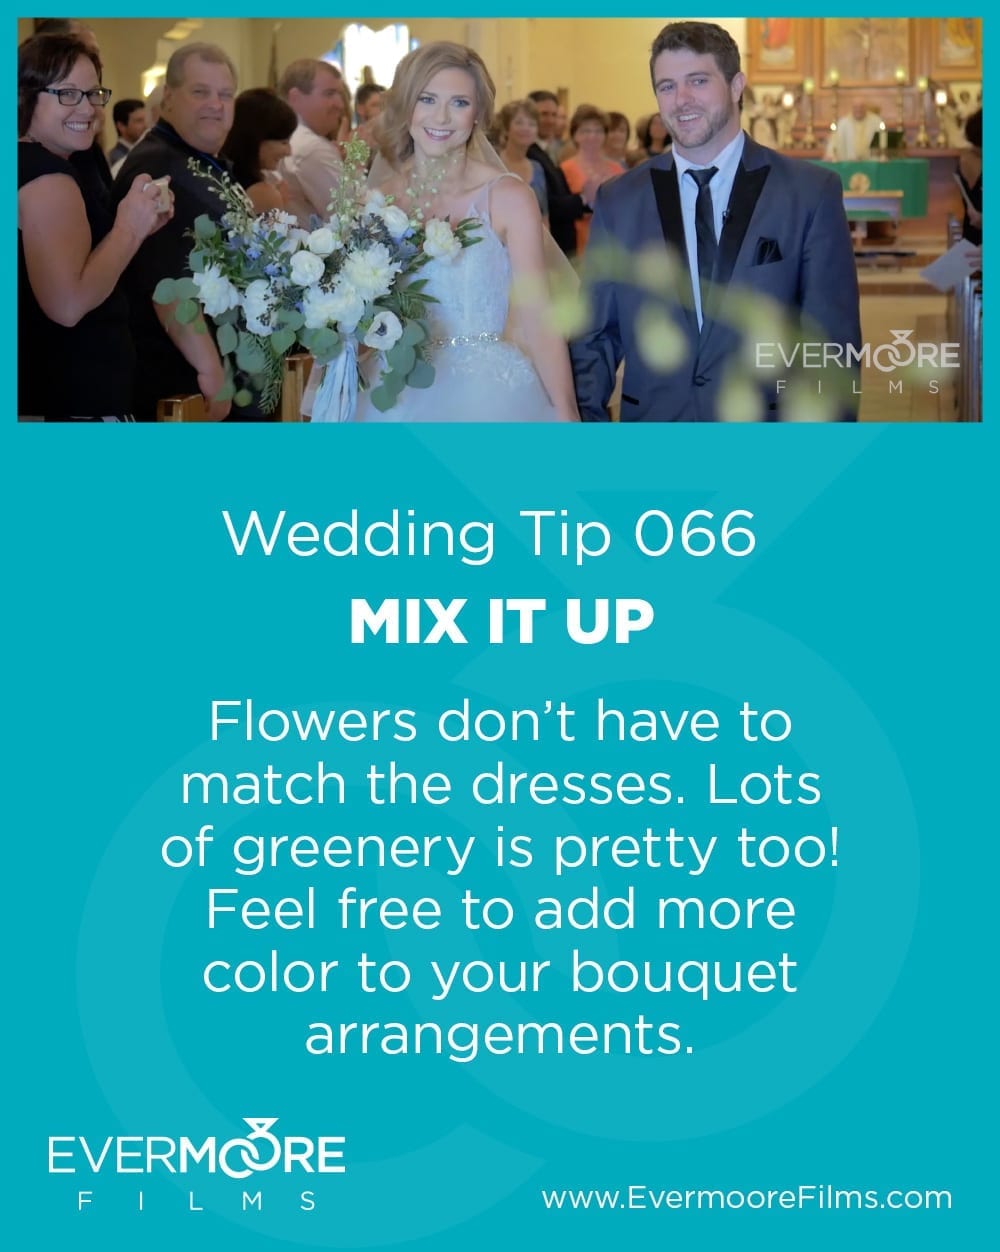 Mix it Up | Day Tip 066 | Flowers don't have to match the dresses. Lots of greenery is pretty too! Feel free to add more color to your bouquet arrangements. 